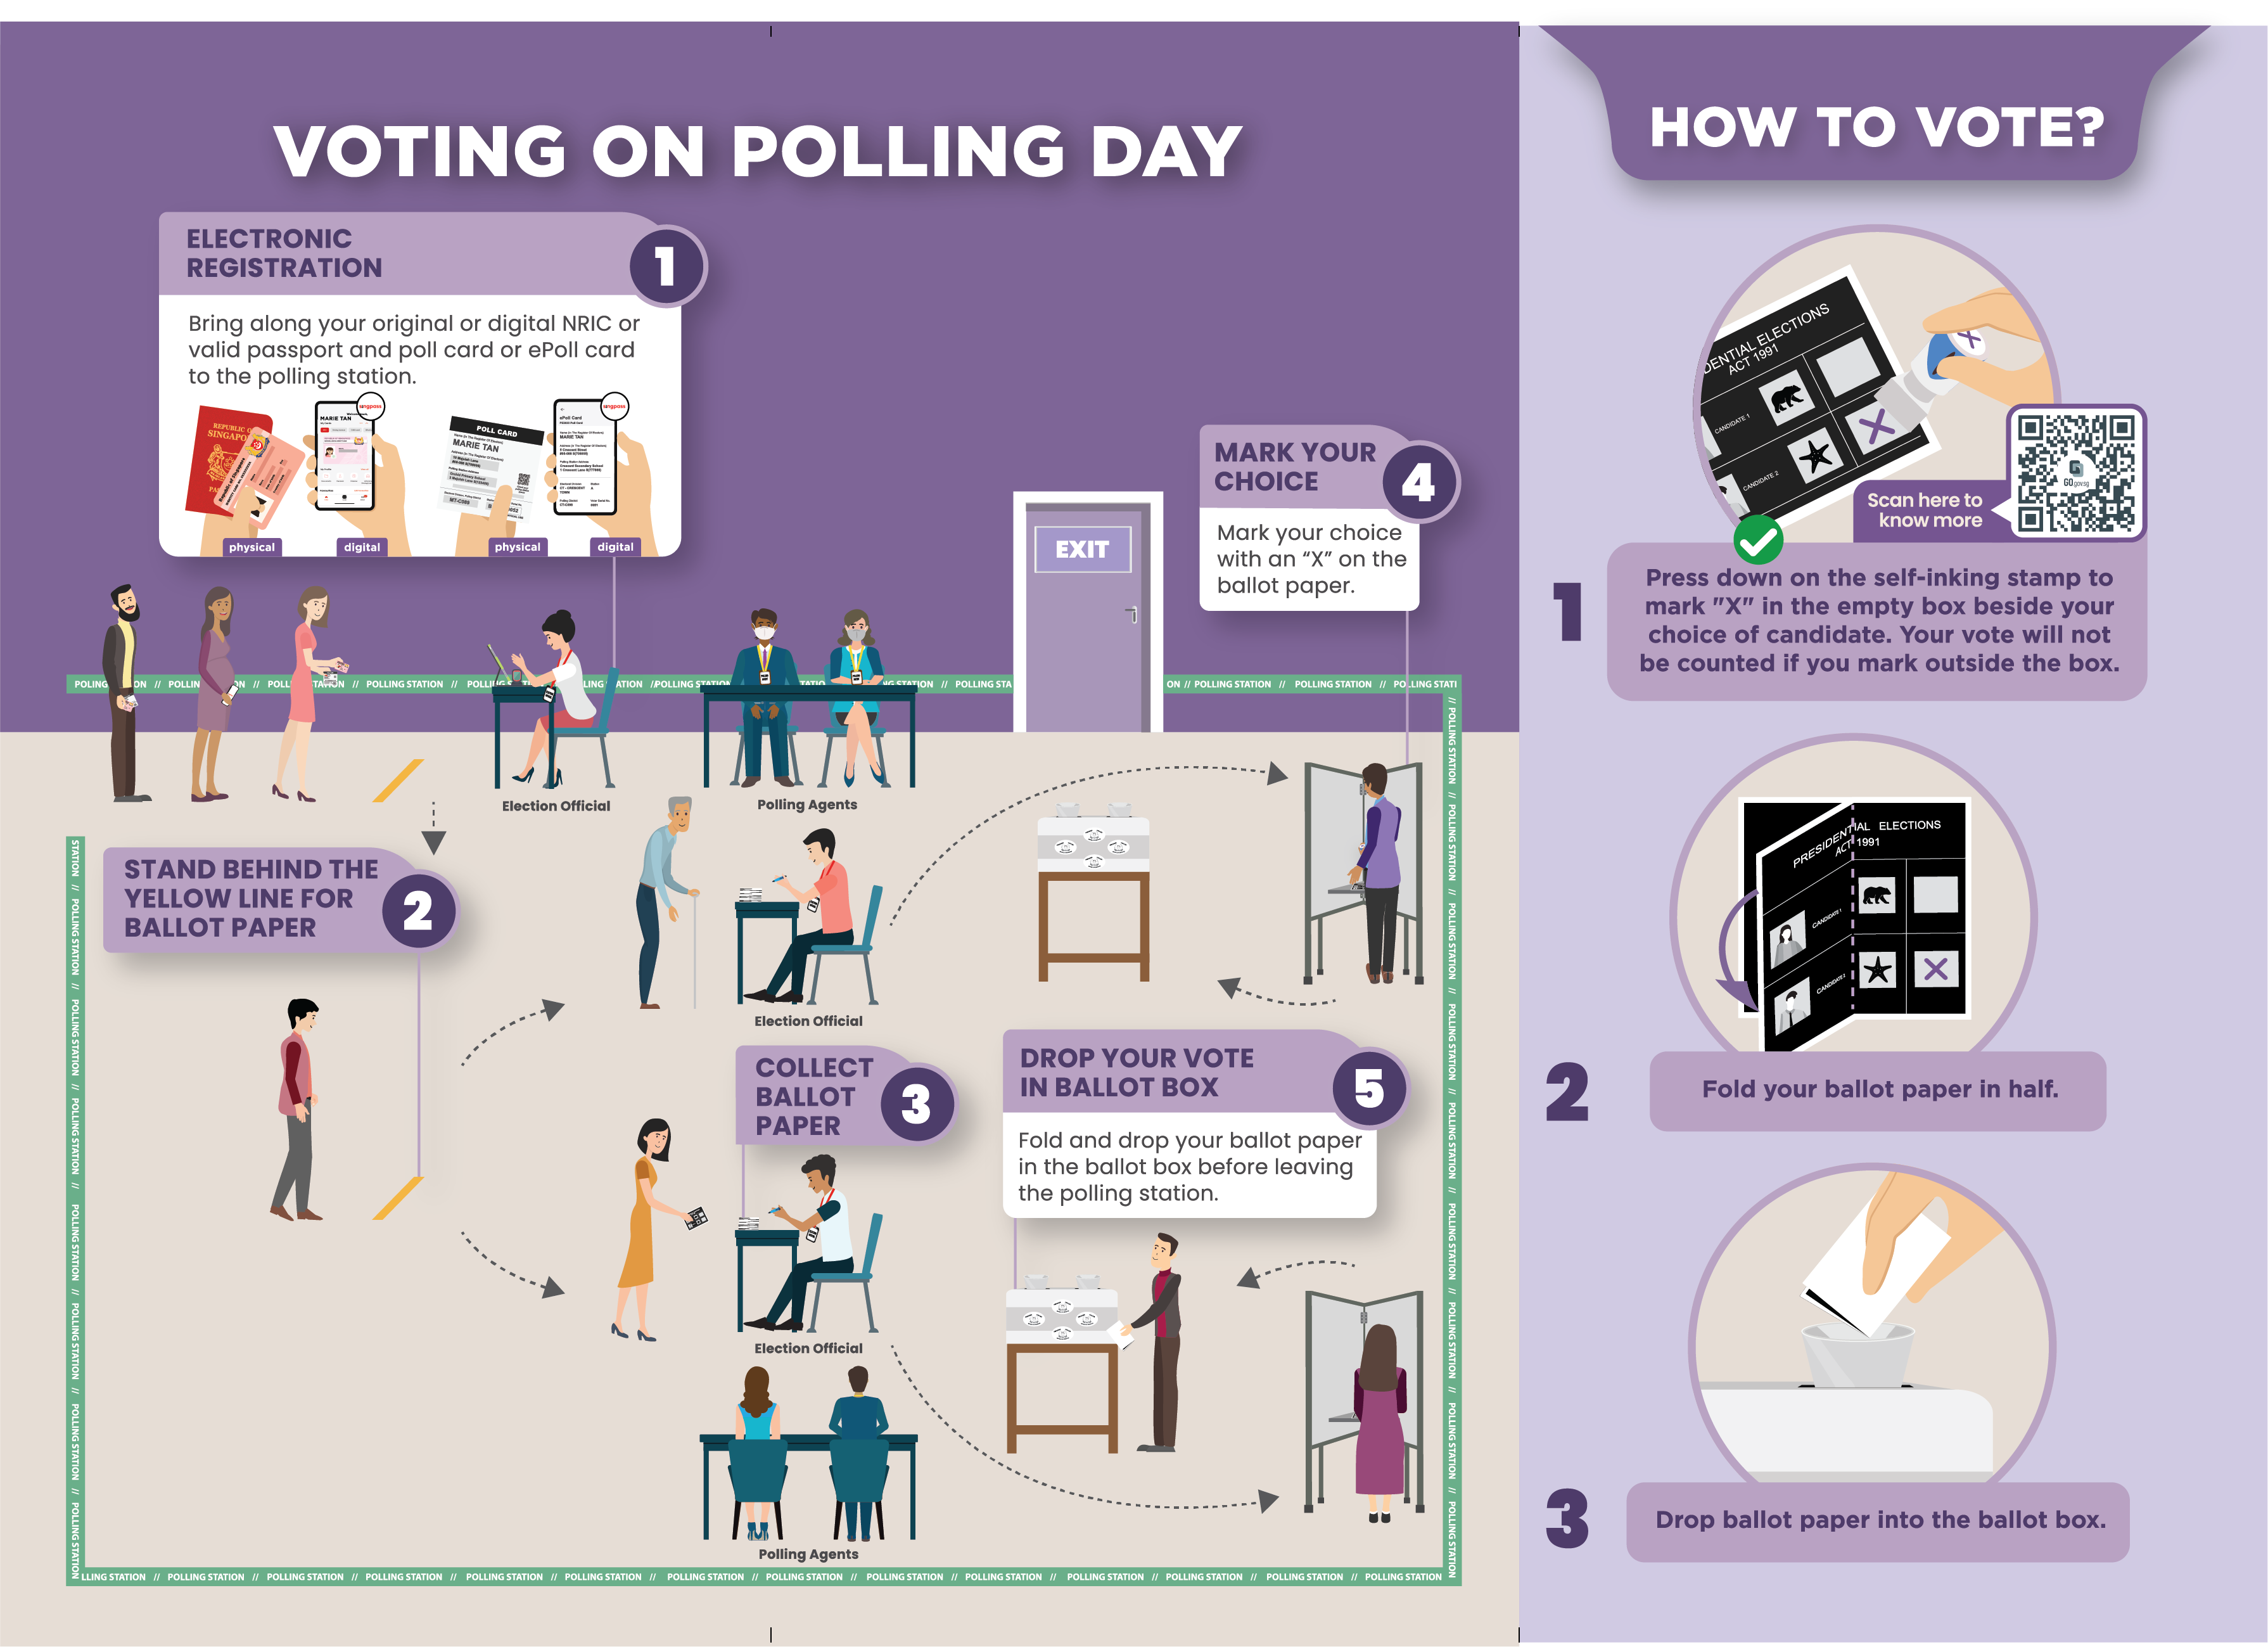 Voting on Polling Day